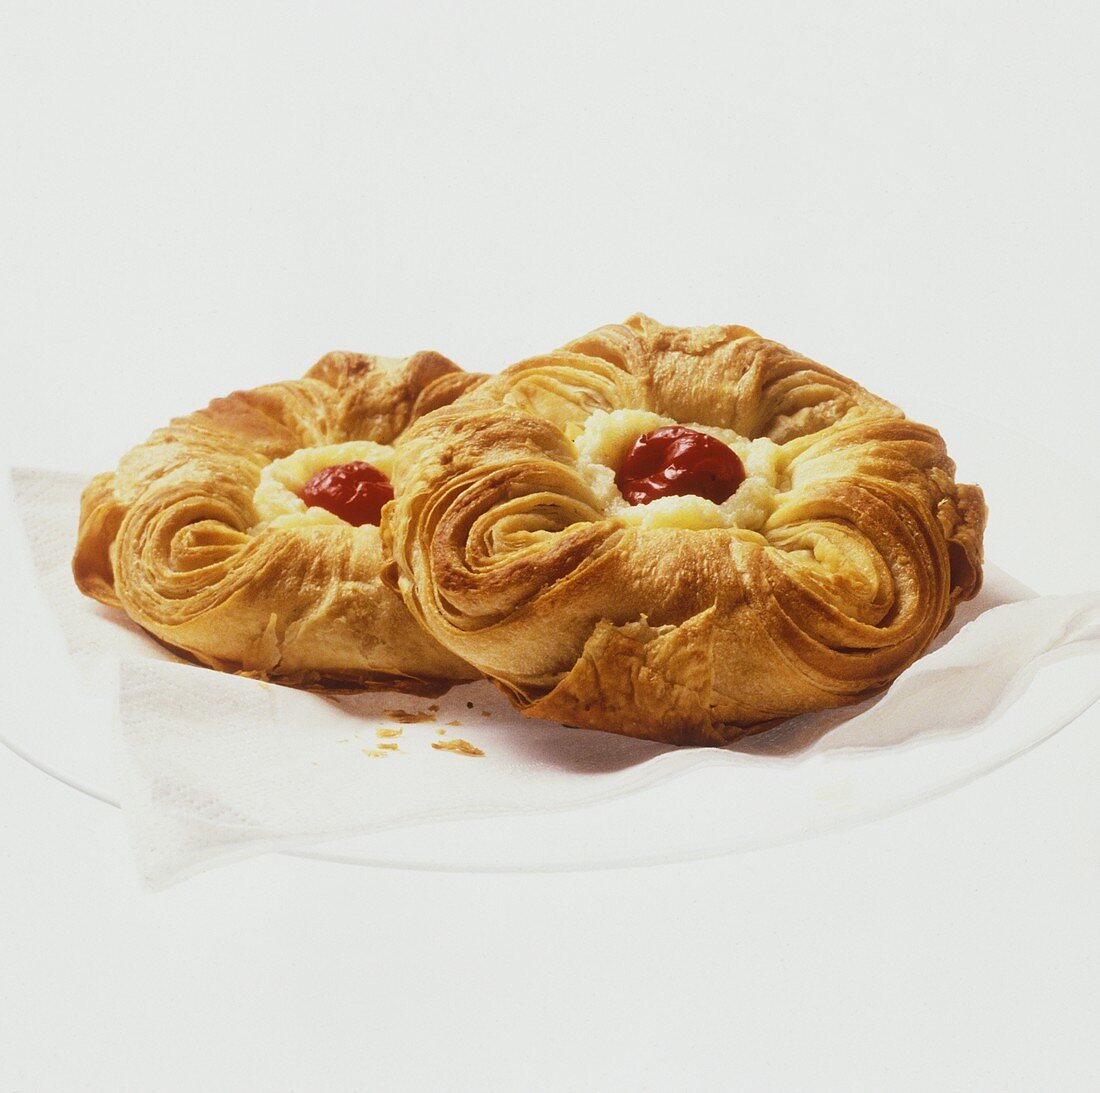 Two puff pastries with blancmange & cherry filling